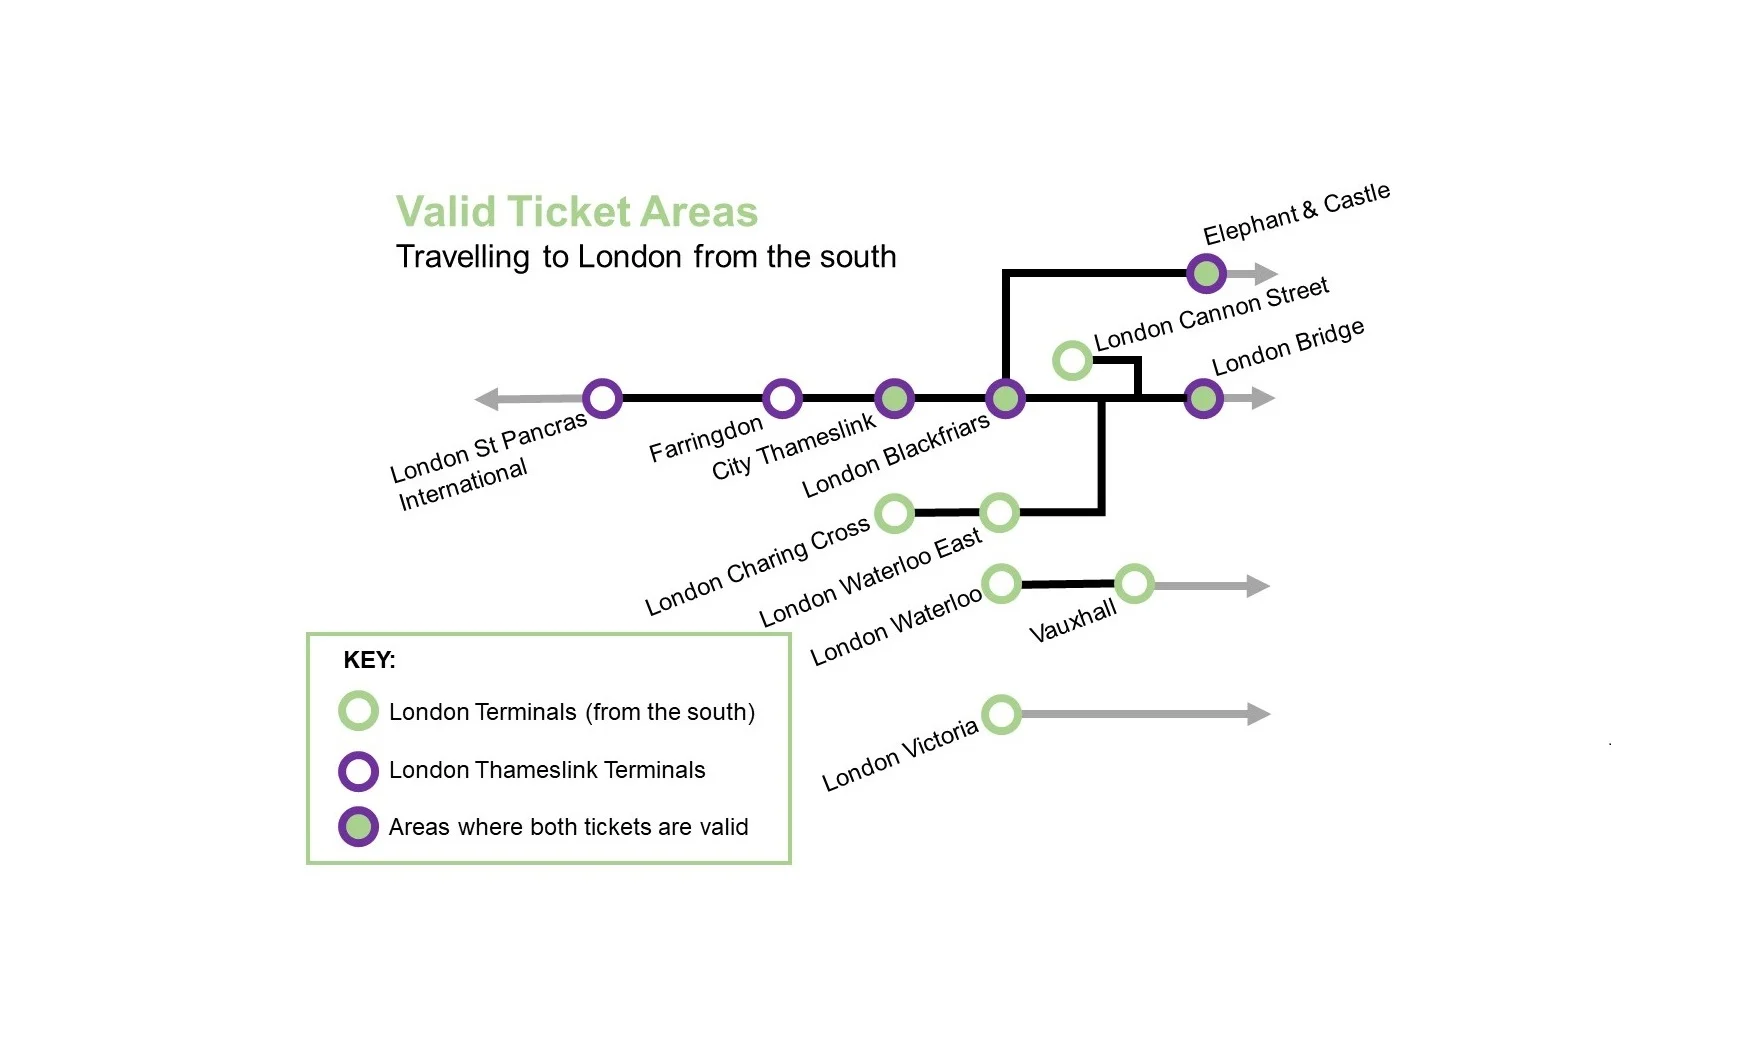 Diagram of stations that London Thameslink or London Terminals tickets are valid to from the south of London,